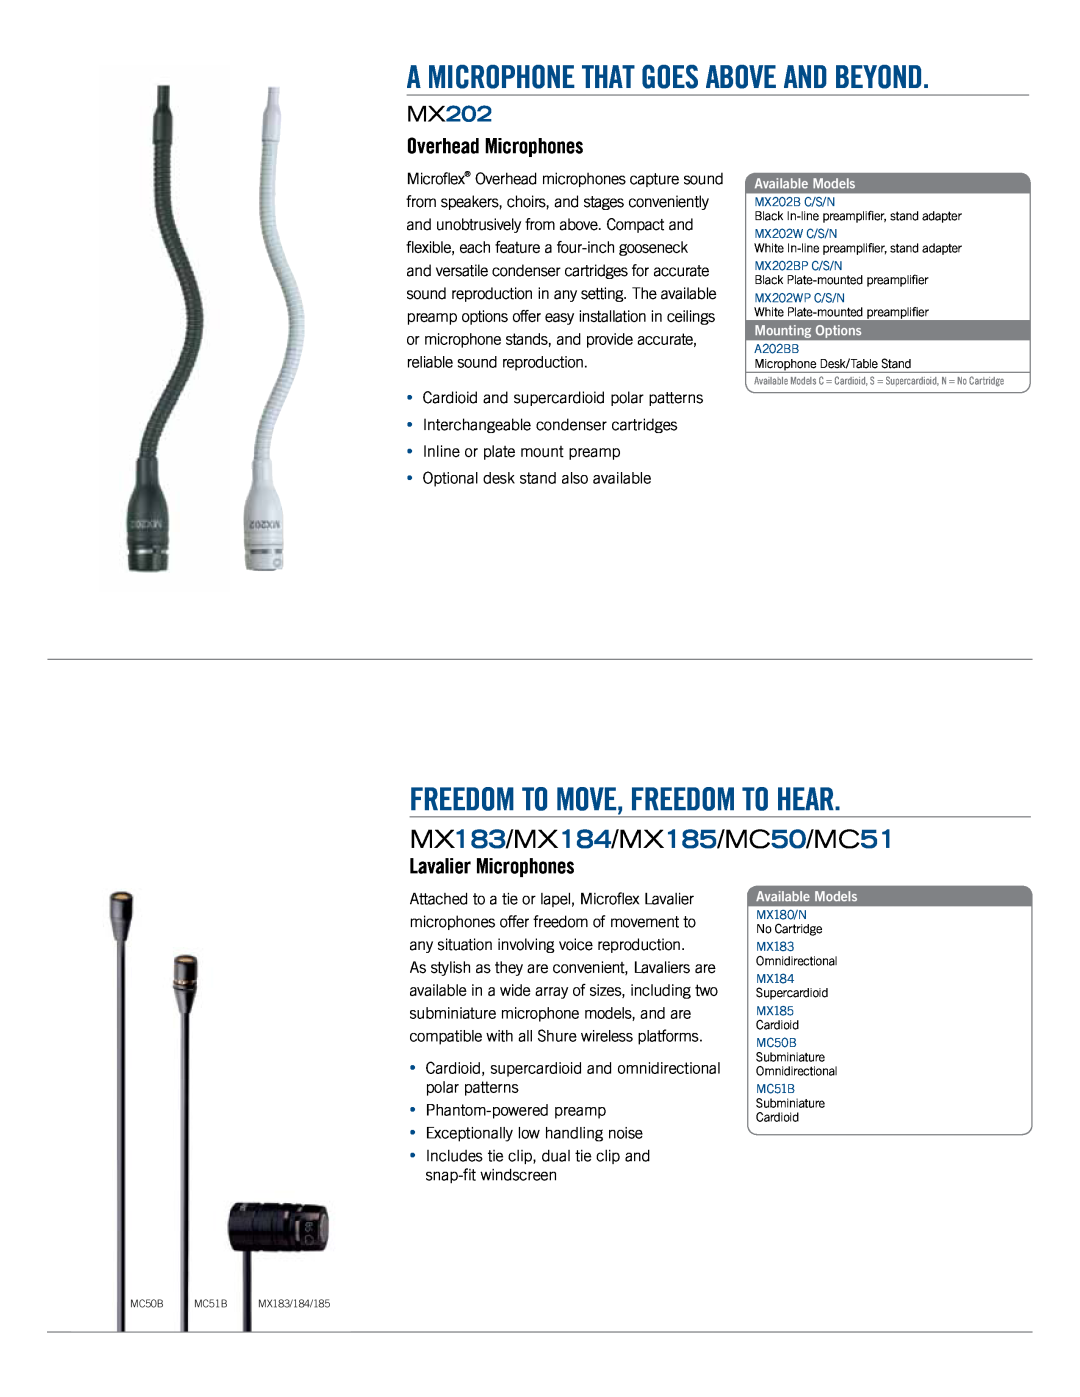 Shure MX410, MX415 A Microphone That Goes Above and Beyond, freedom to move, freedom to hear, Overhead Microphones, MX202 